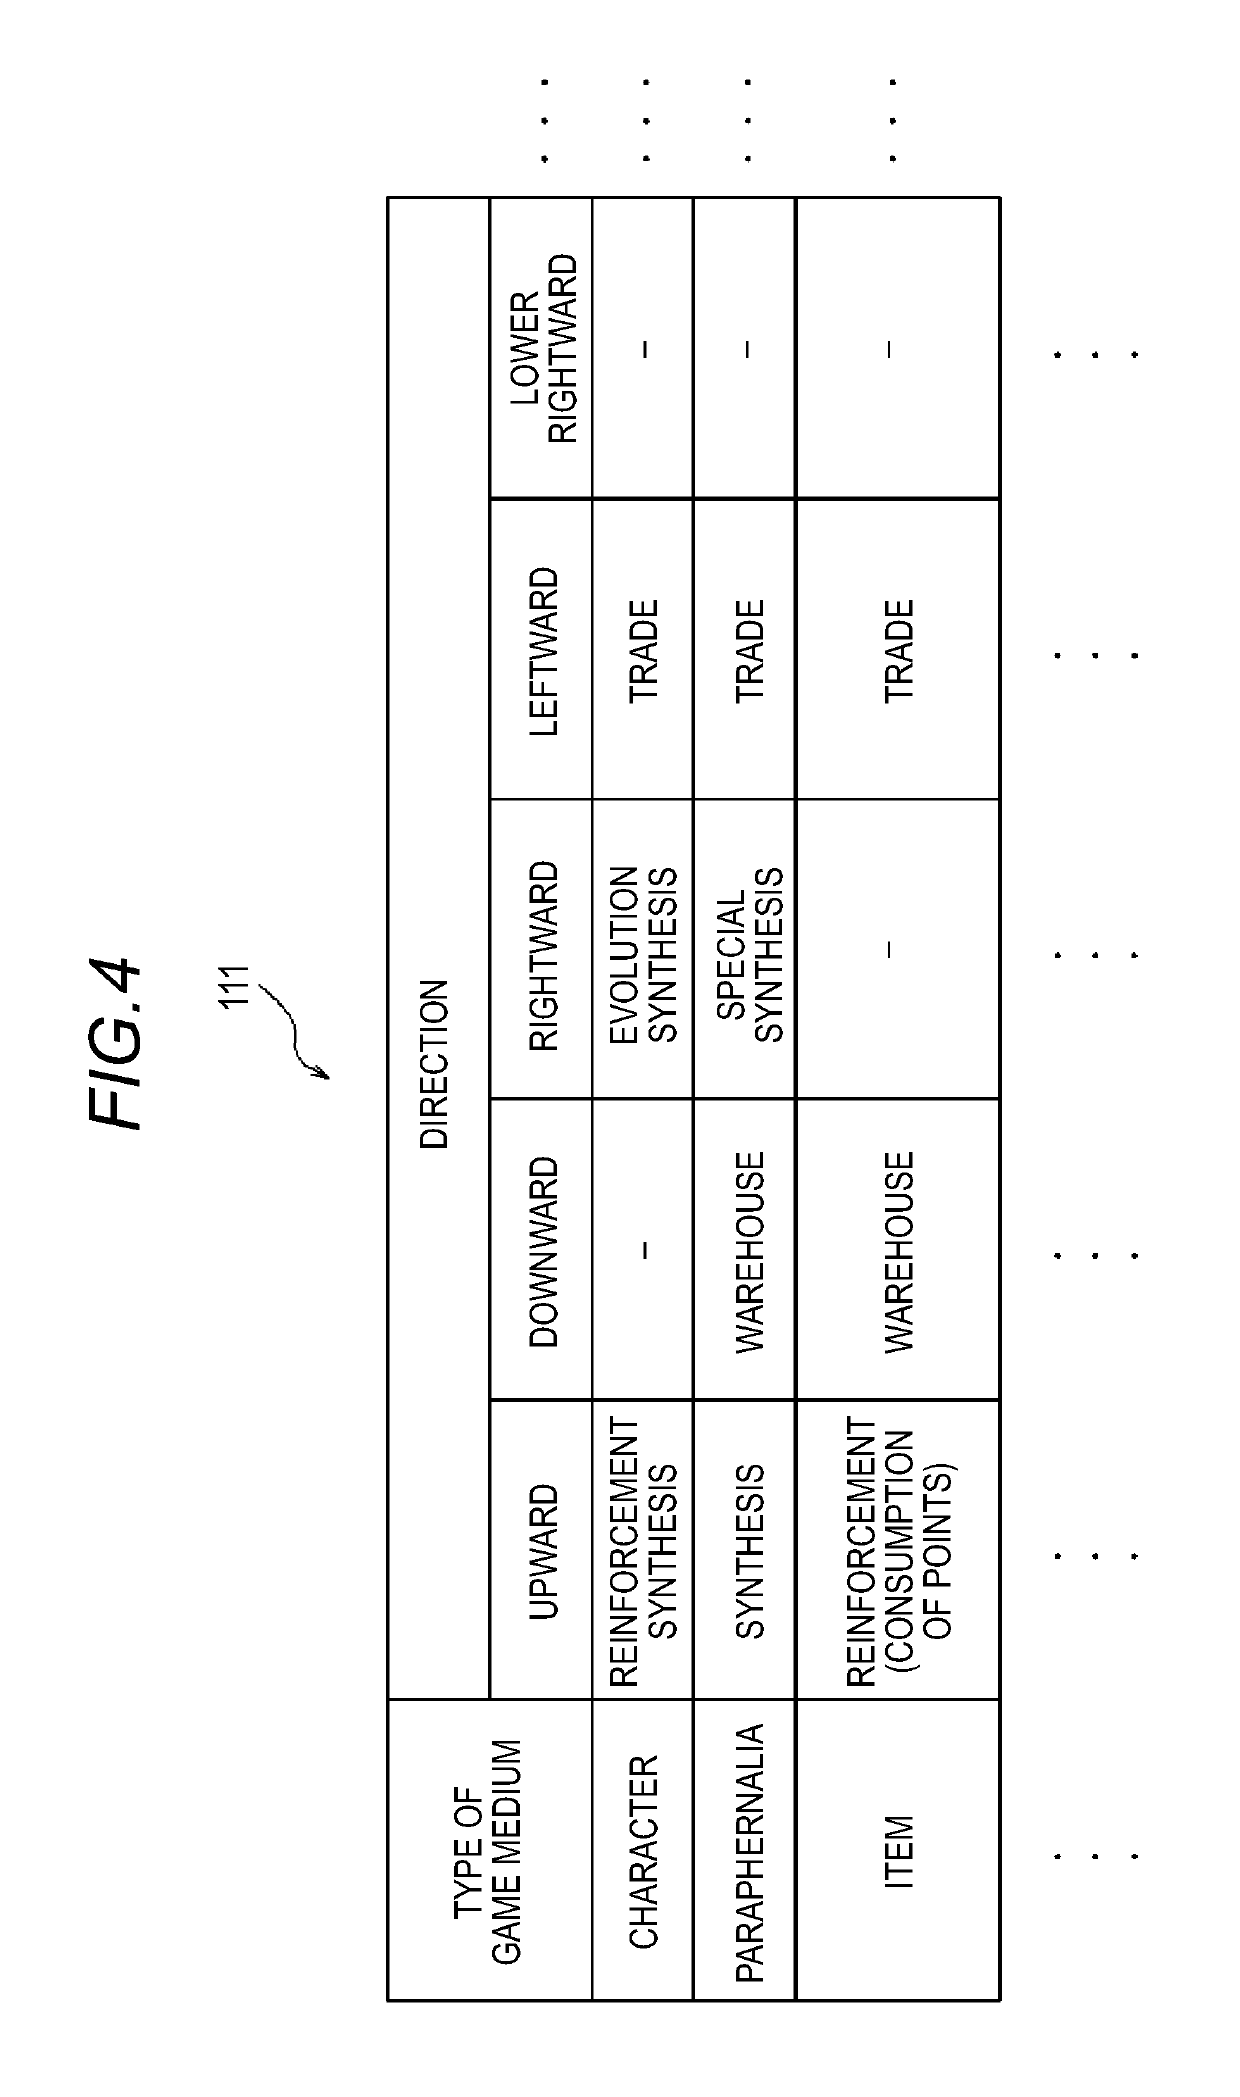 Game device having improved slide-operation-driven user interface